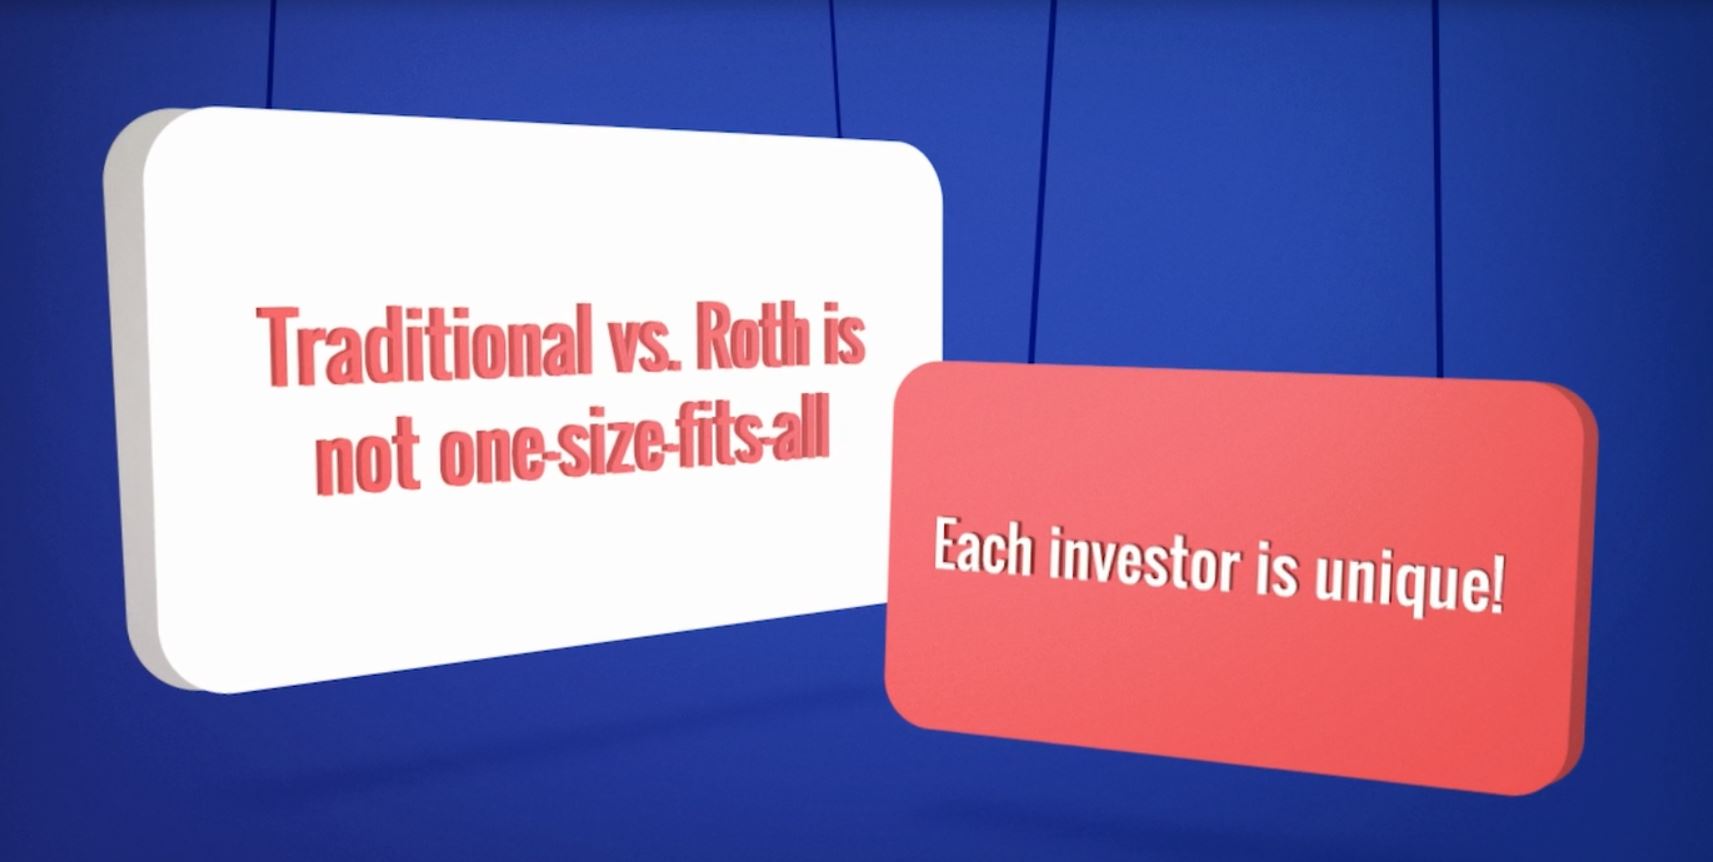 VIDEO: Traditional 401(k) vs. Roth 401(k): Which Should You Choose?